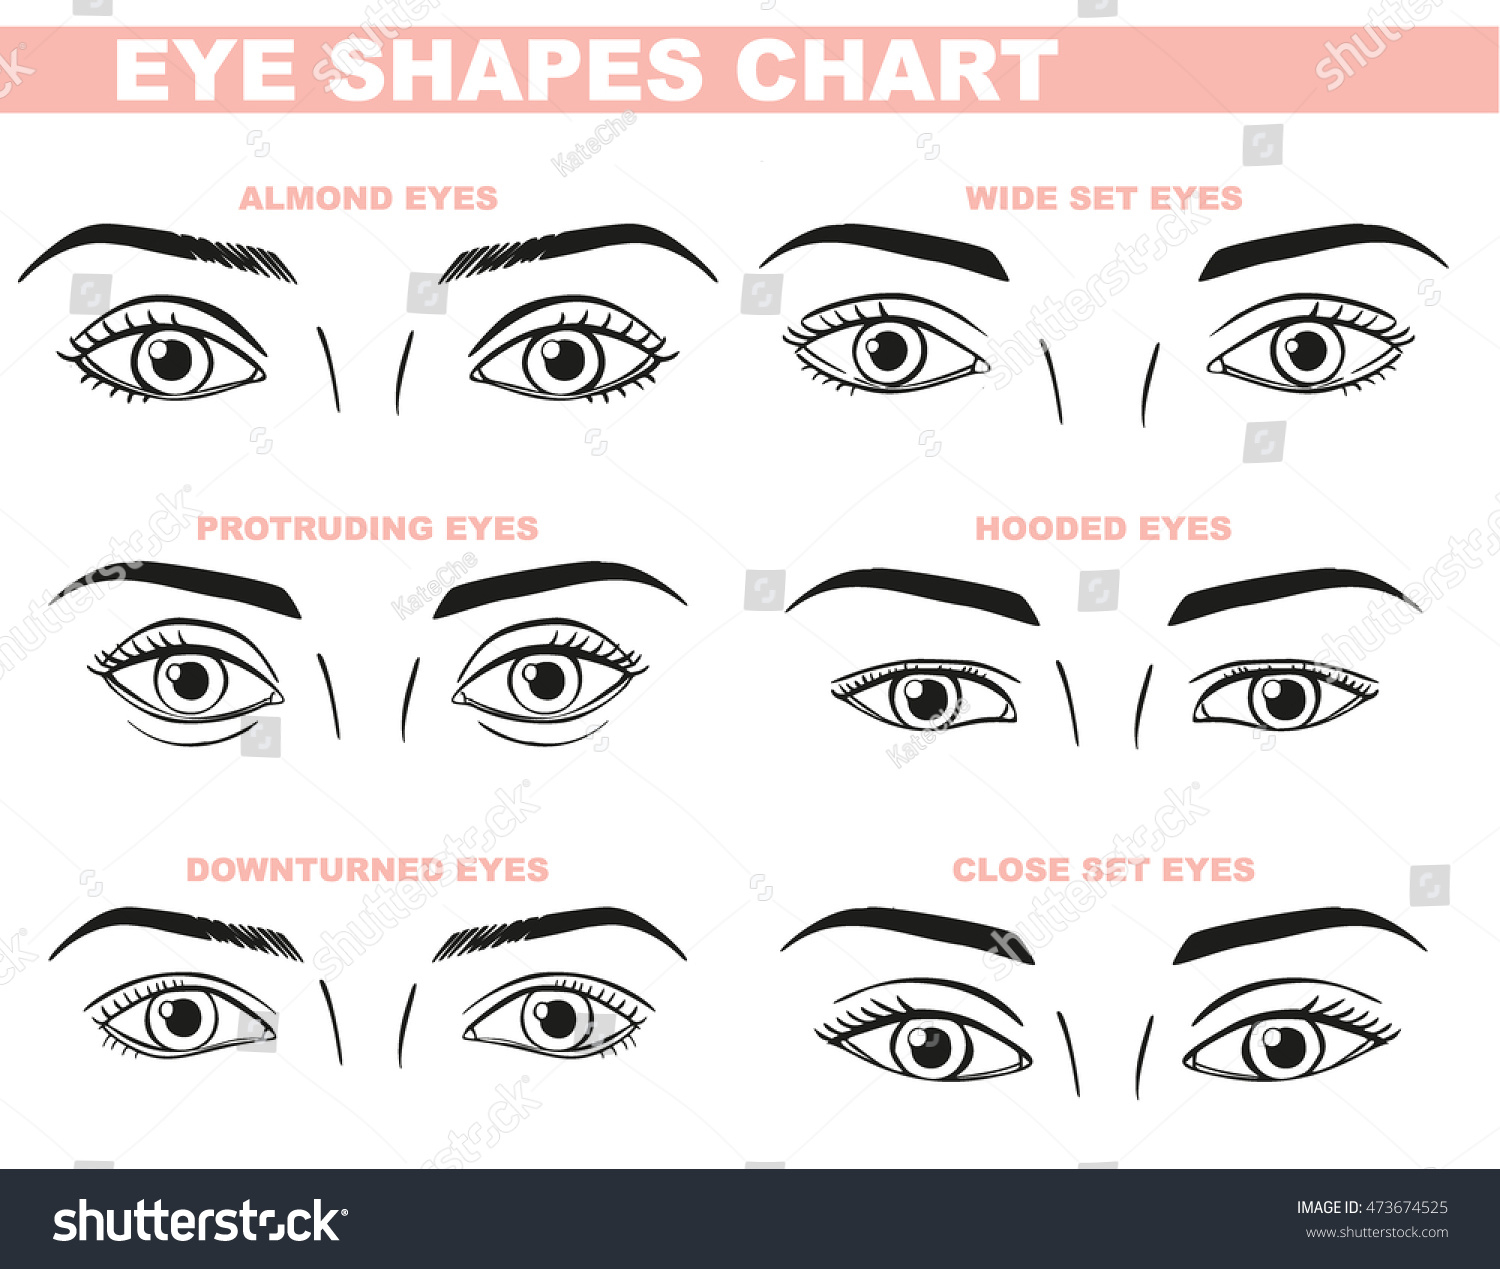 Makeup For Close Set Eyes Eyes Face Chart Blank Template Makeup Stock Vector Royalty Free